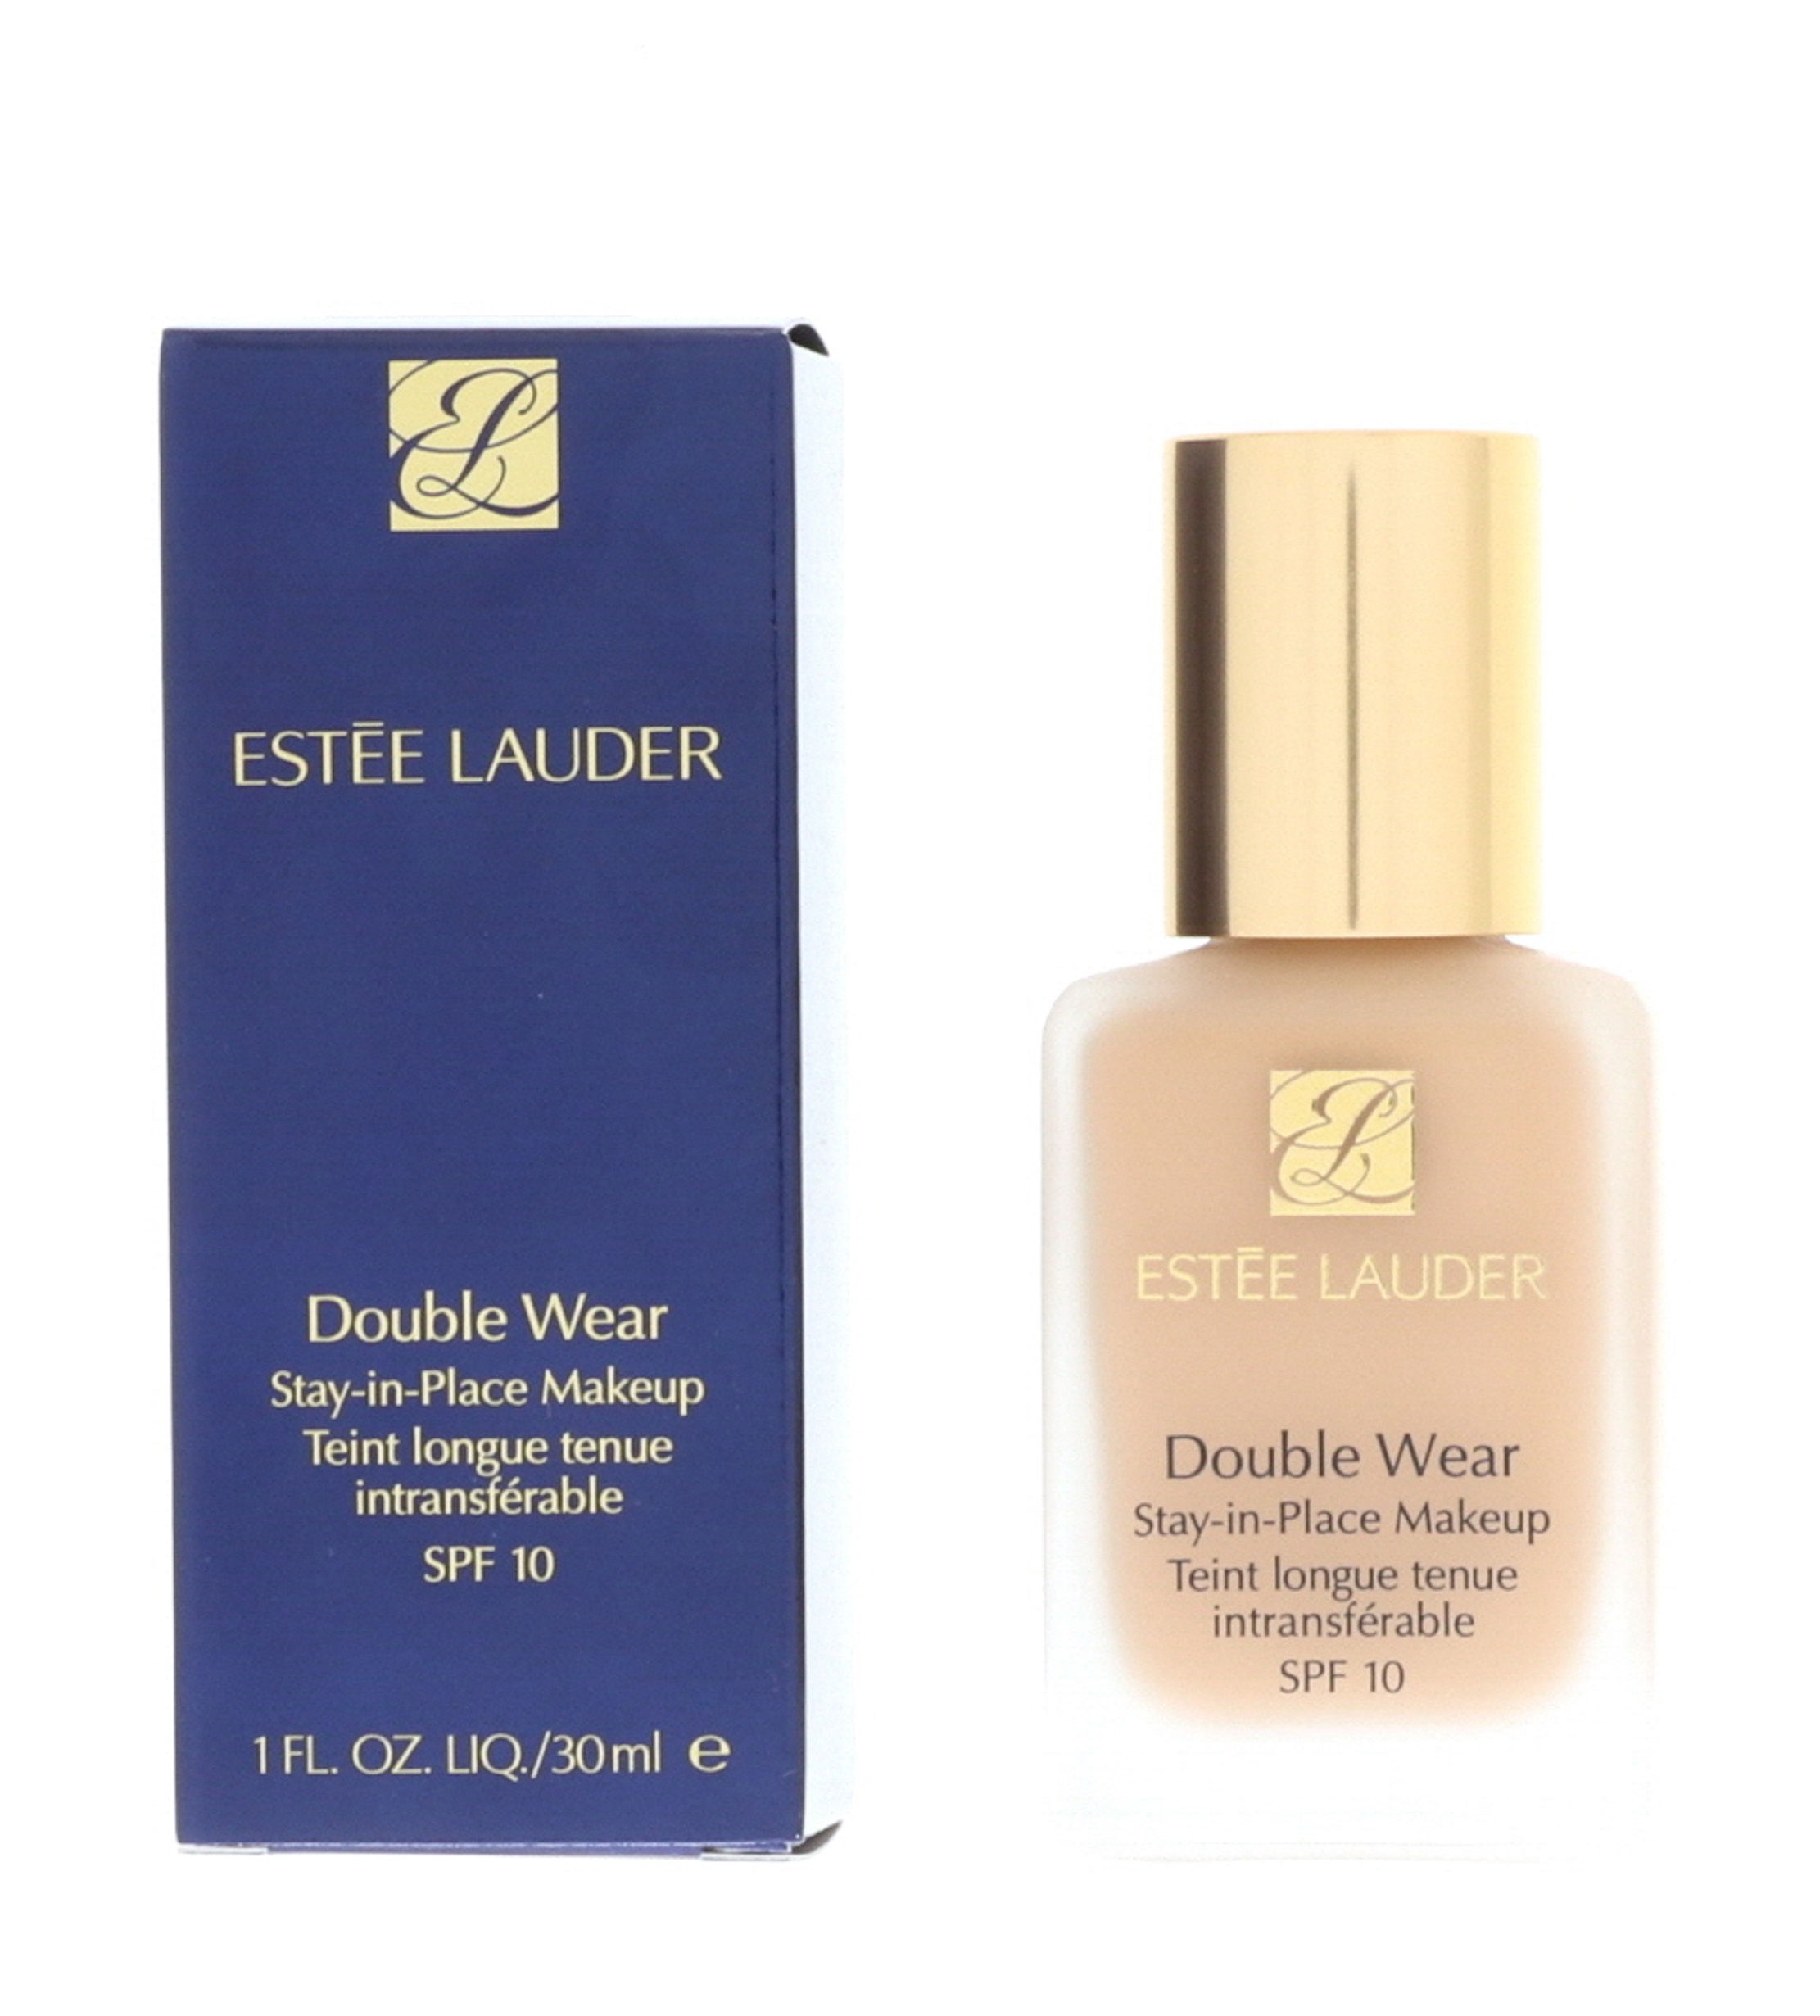 Estee Lauder Double Wear Stay-in-Place Makeup SPF10 - 2W1 Dawn, 1 oz - image 1 of 2